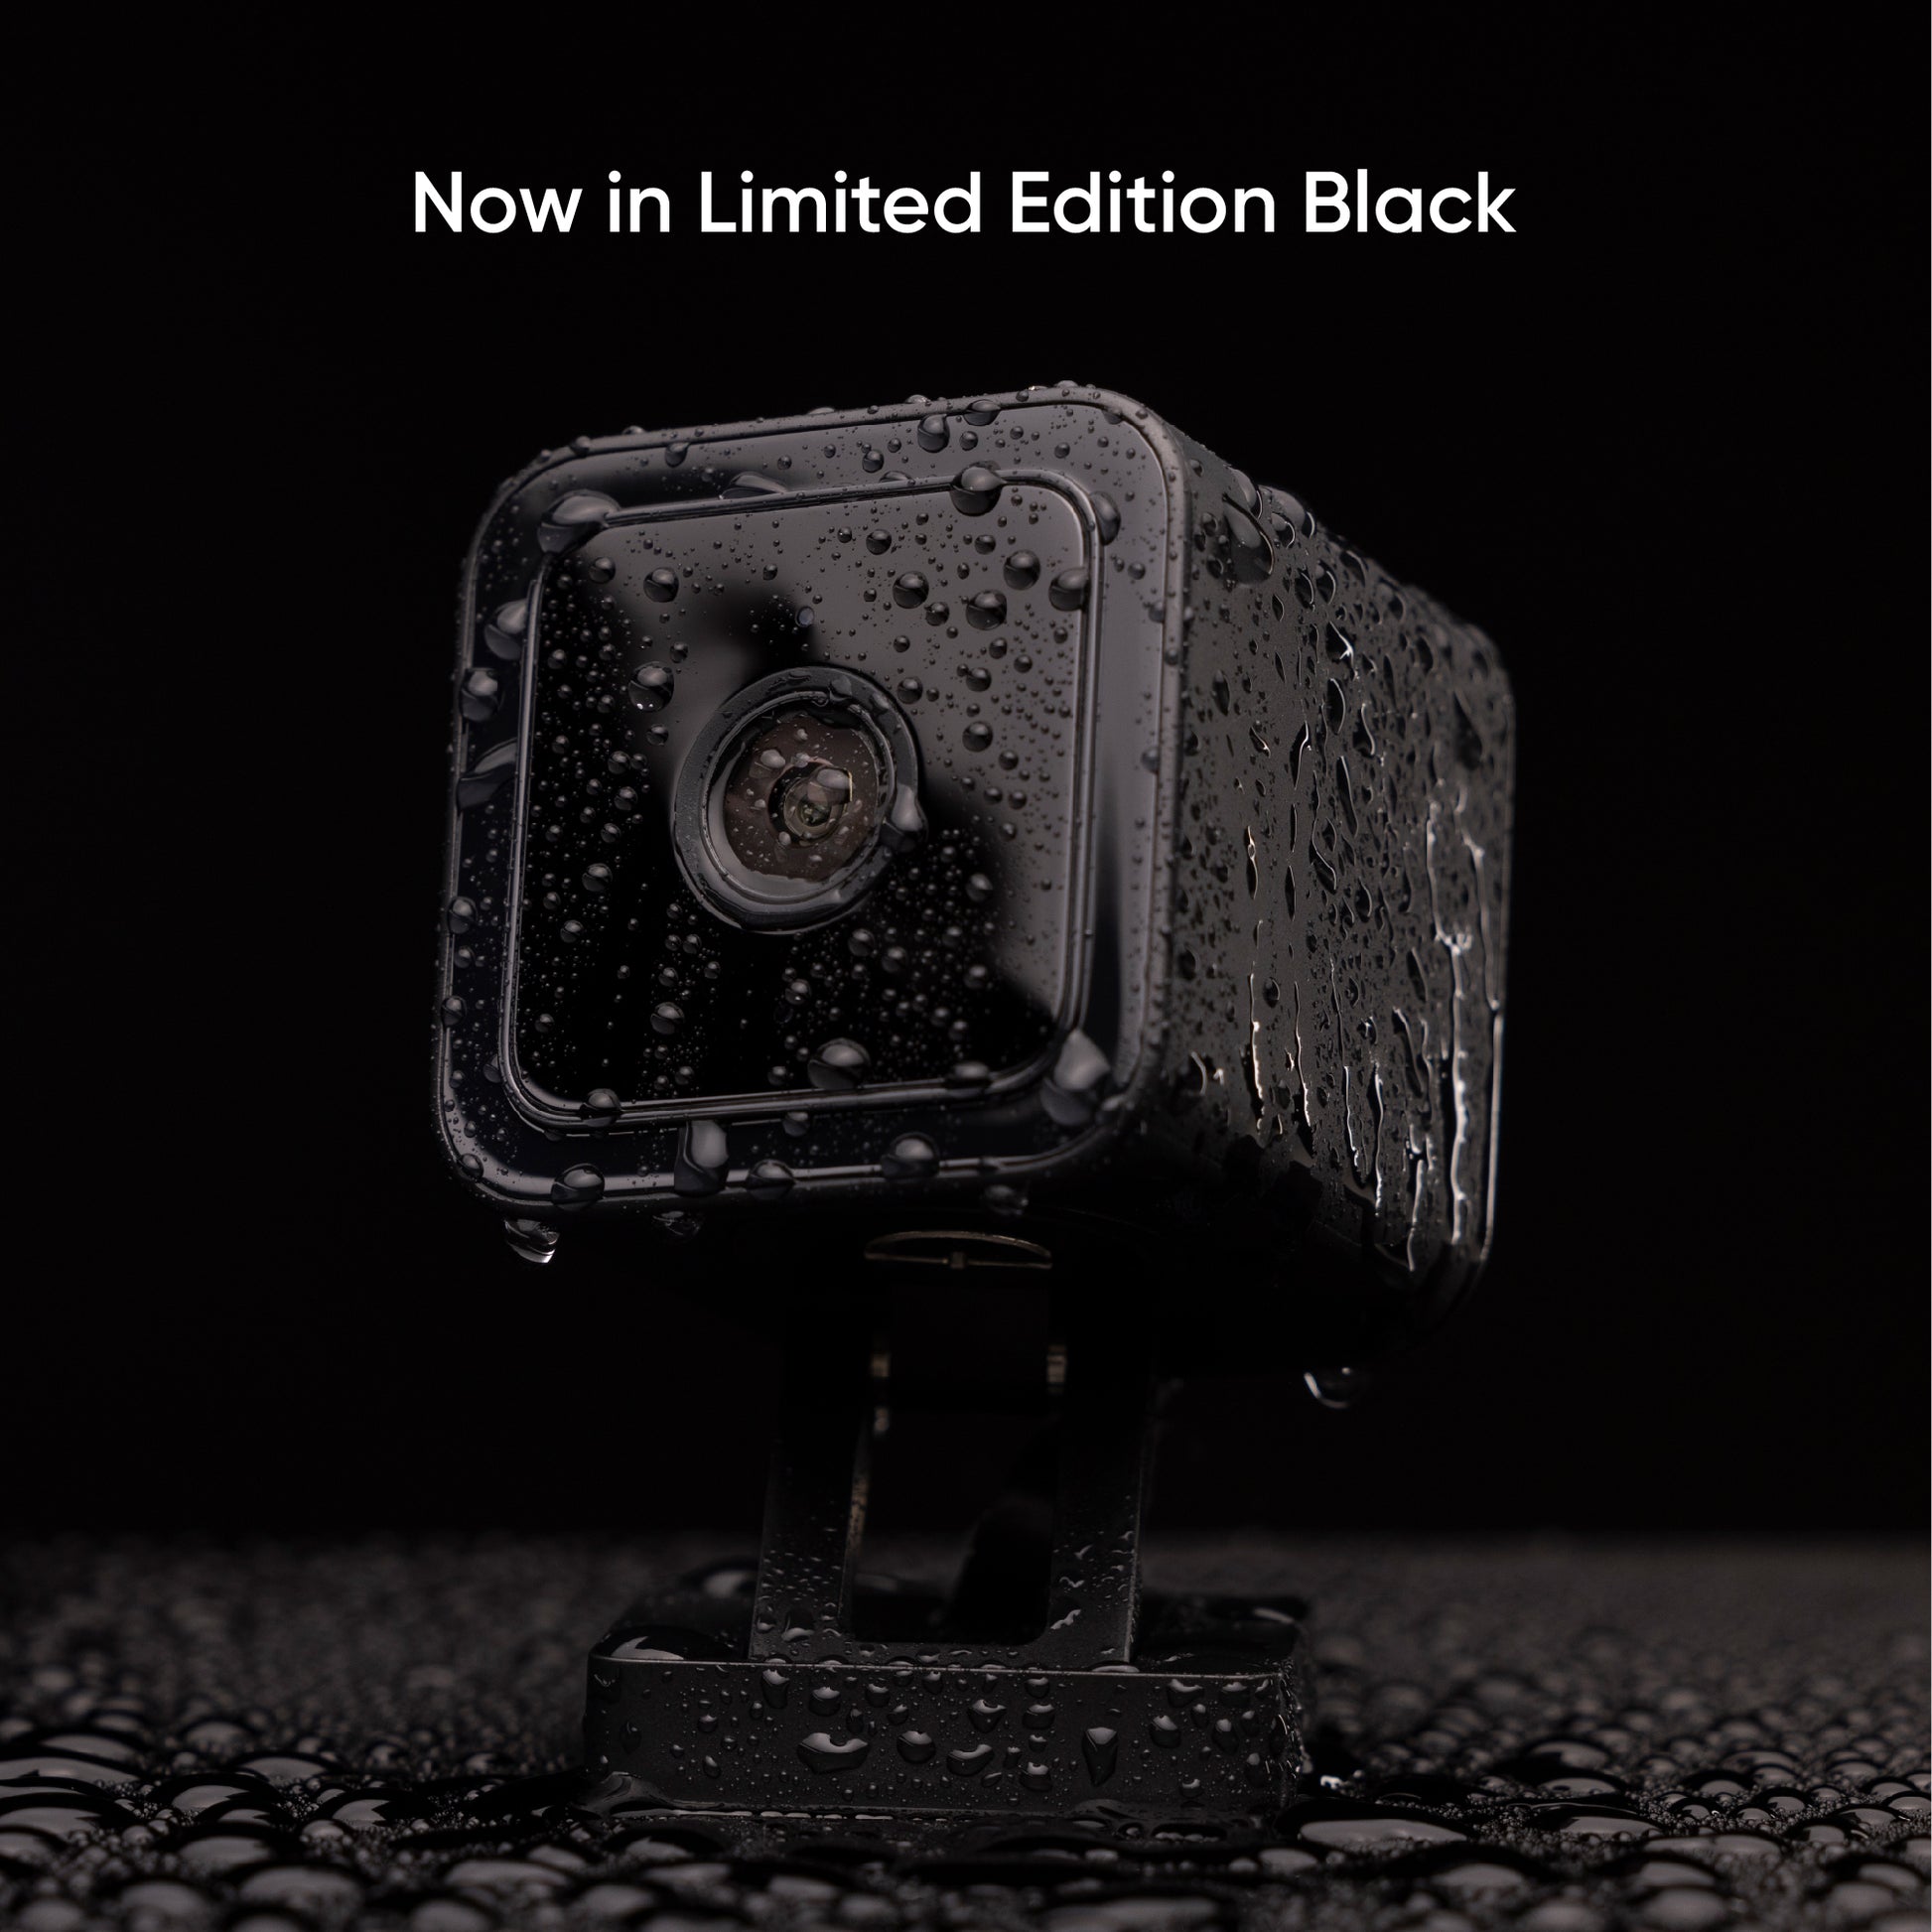 Wyze Cam v3 black edition model covered in water droplets